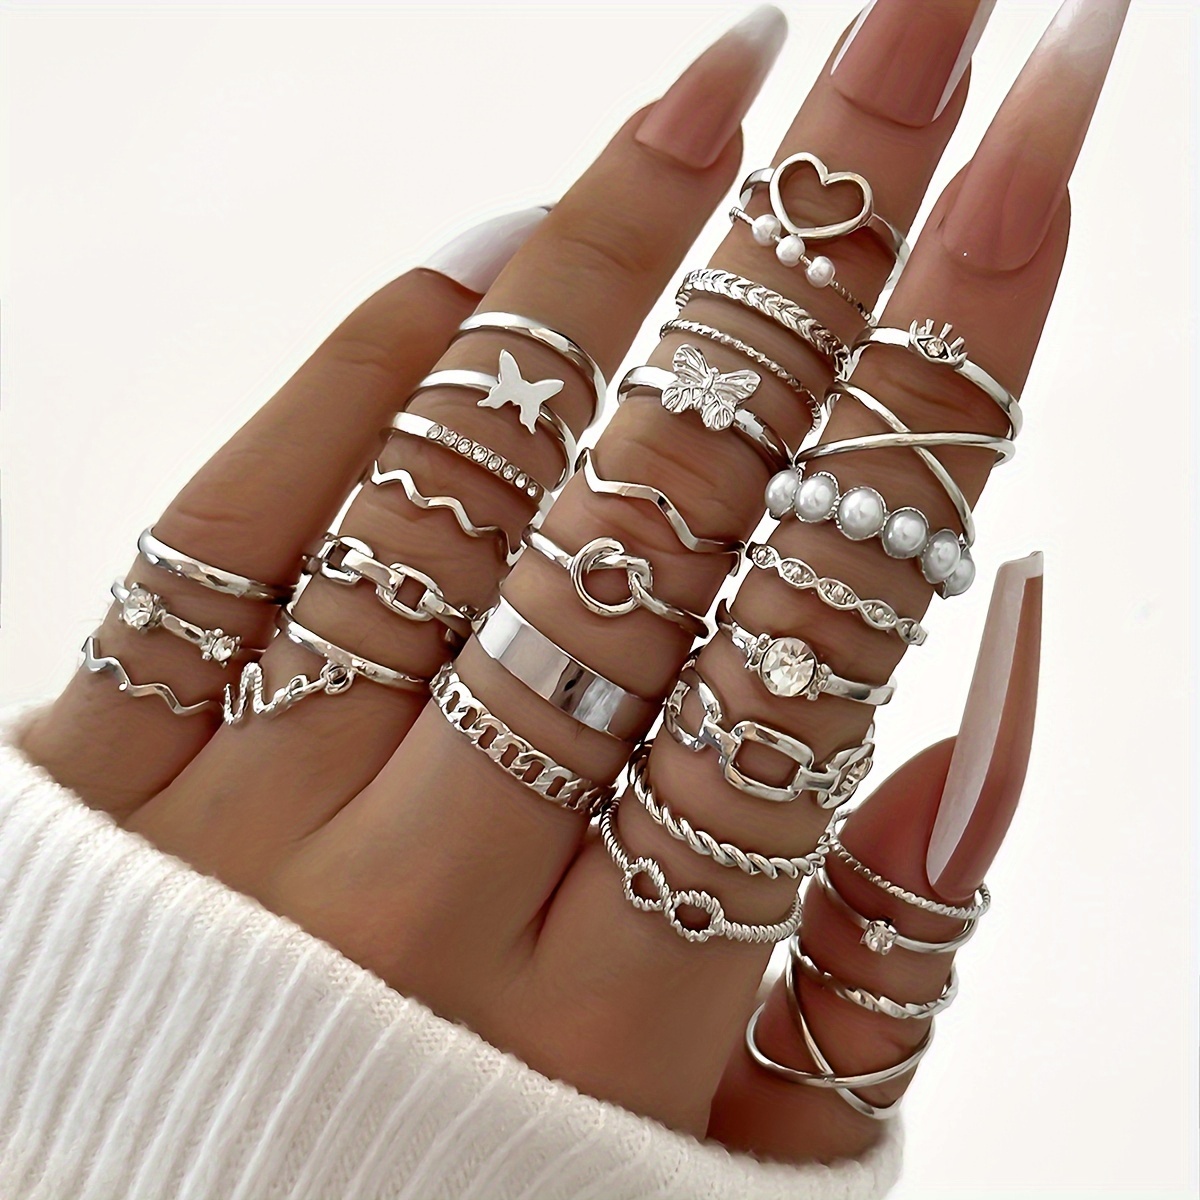 

30pcs Chic Stacking Rings Trendy Butterfly/ Chain/ Infinity Design Mix And Match For Daily Outfits Party Accessories Chic And Cheap Thing